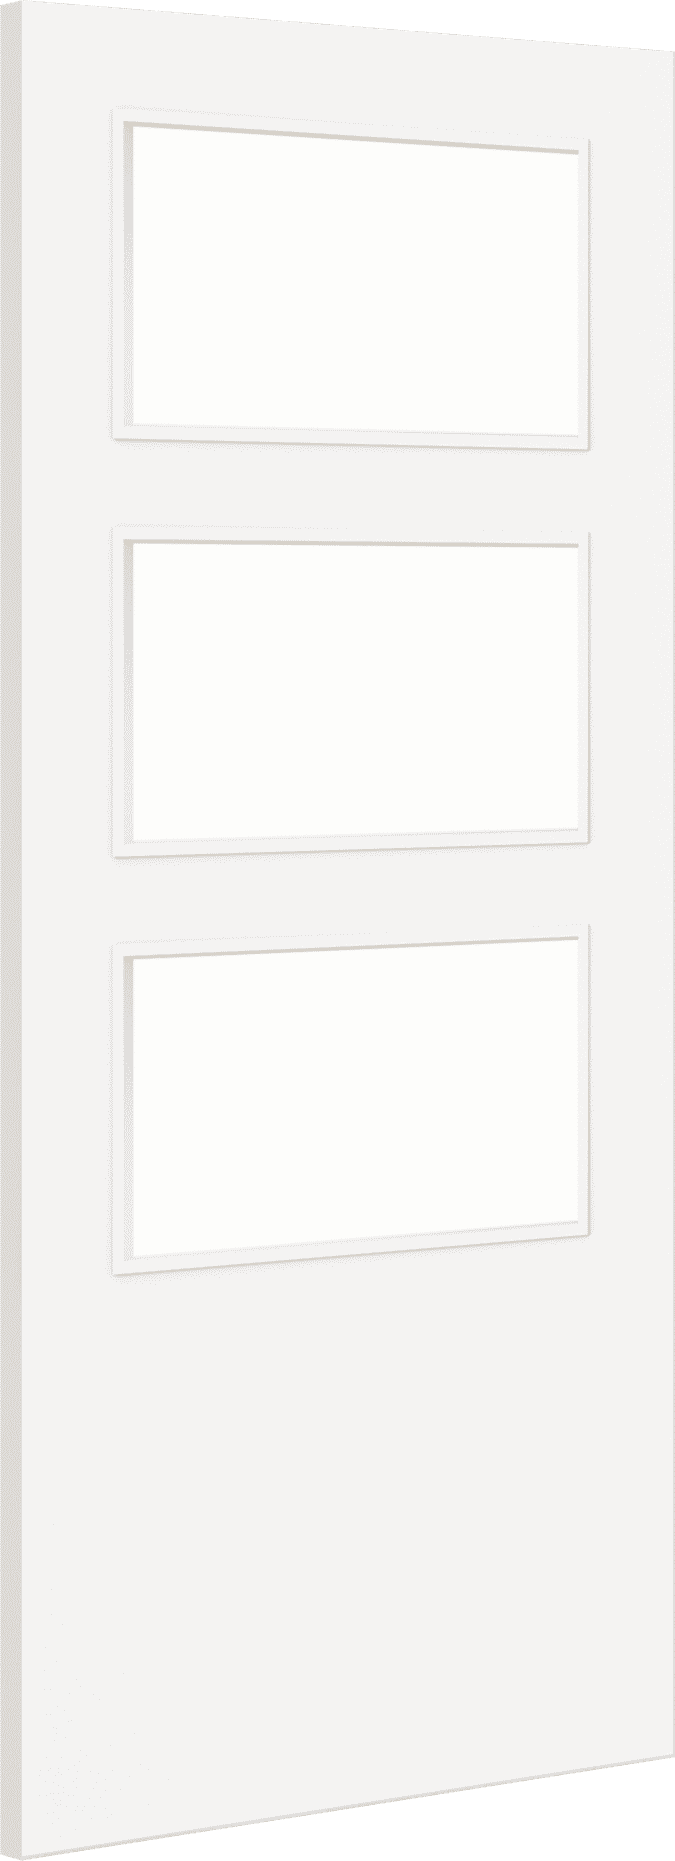 1981mm x 610mm x 44mm (24") Architectural Paint Grade White 03 Frosted Glazed Fire Door Blank